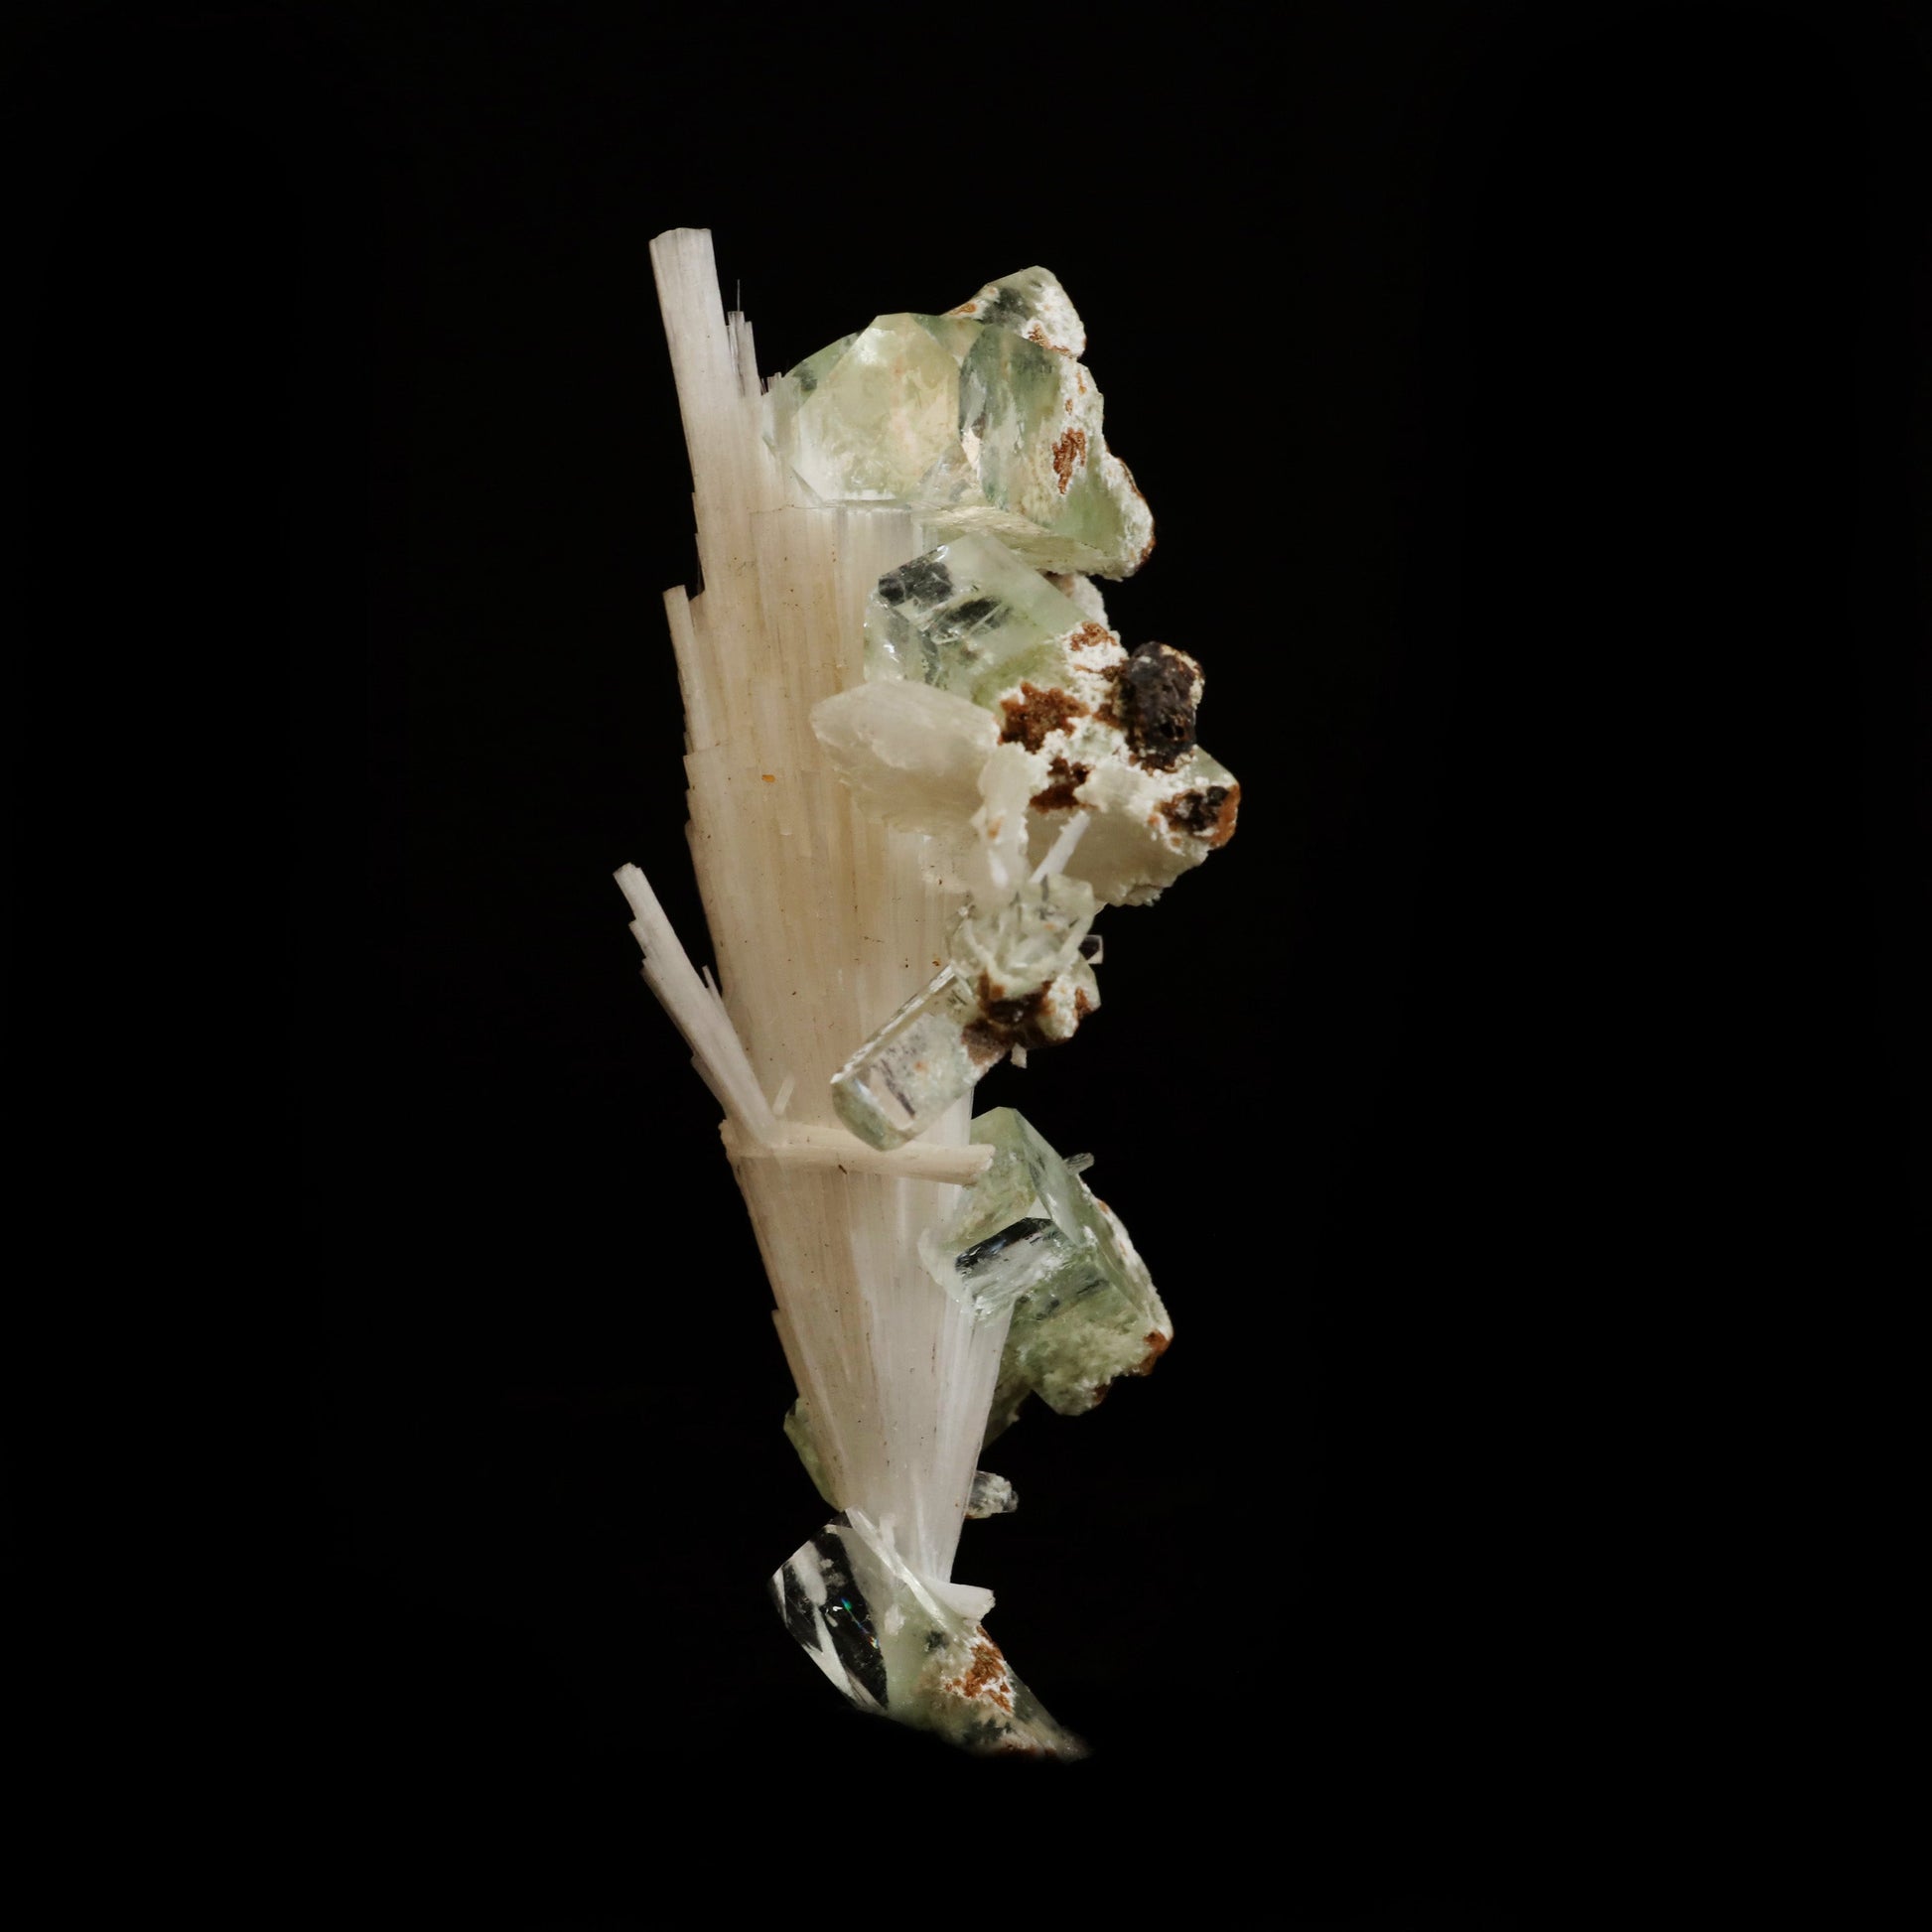 Green Apophyllite with Scolecite Sprays Natural Mineral Specimen # B …  https://www.superbminerals.us/products/green-apophyllite-with-scolecite-sprays-natural-mineral-specimen-b-5019  Features:&nbsp;A massive spray of elongated colourless Scolecite crystals. A little fragment of matrix is connected, along with a small Stilbite crystal and light green apophyllite crystals.Scolecite crystals have a glassy appearance and are highly translucent, with transparent terminations. 